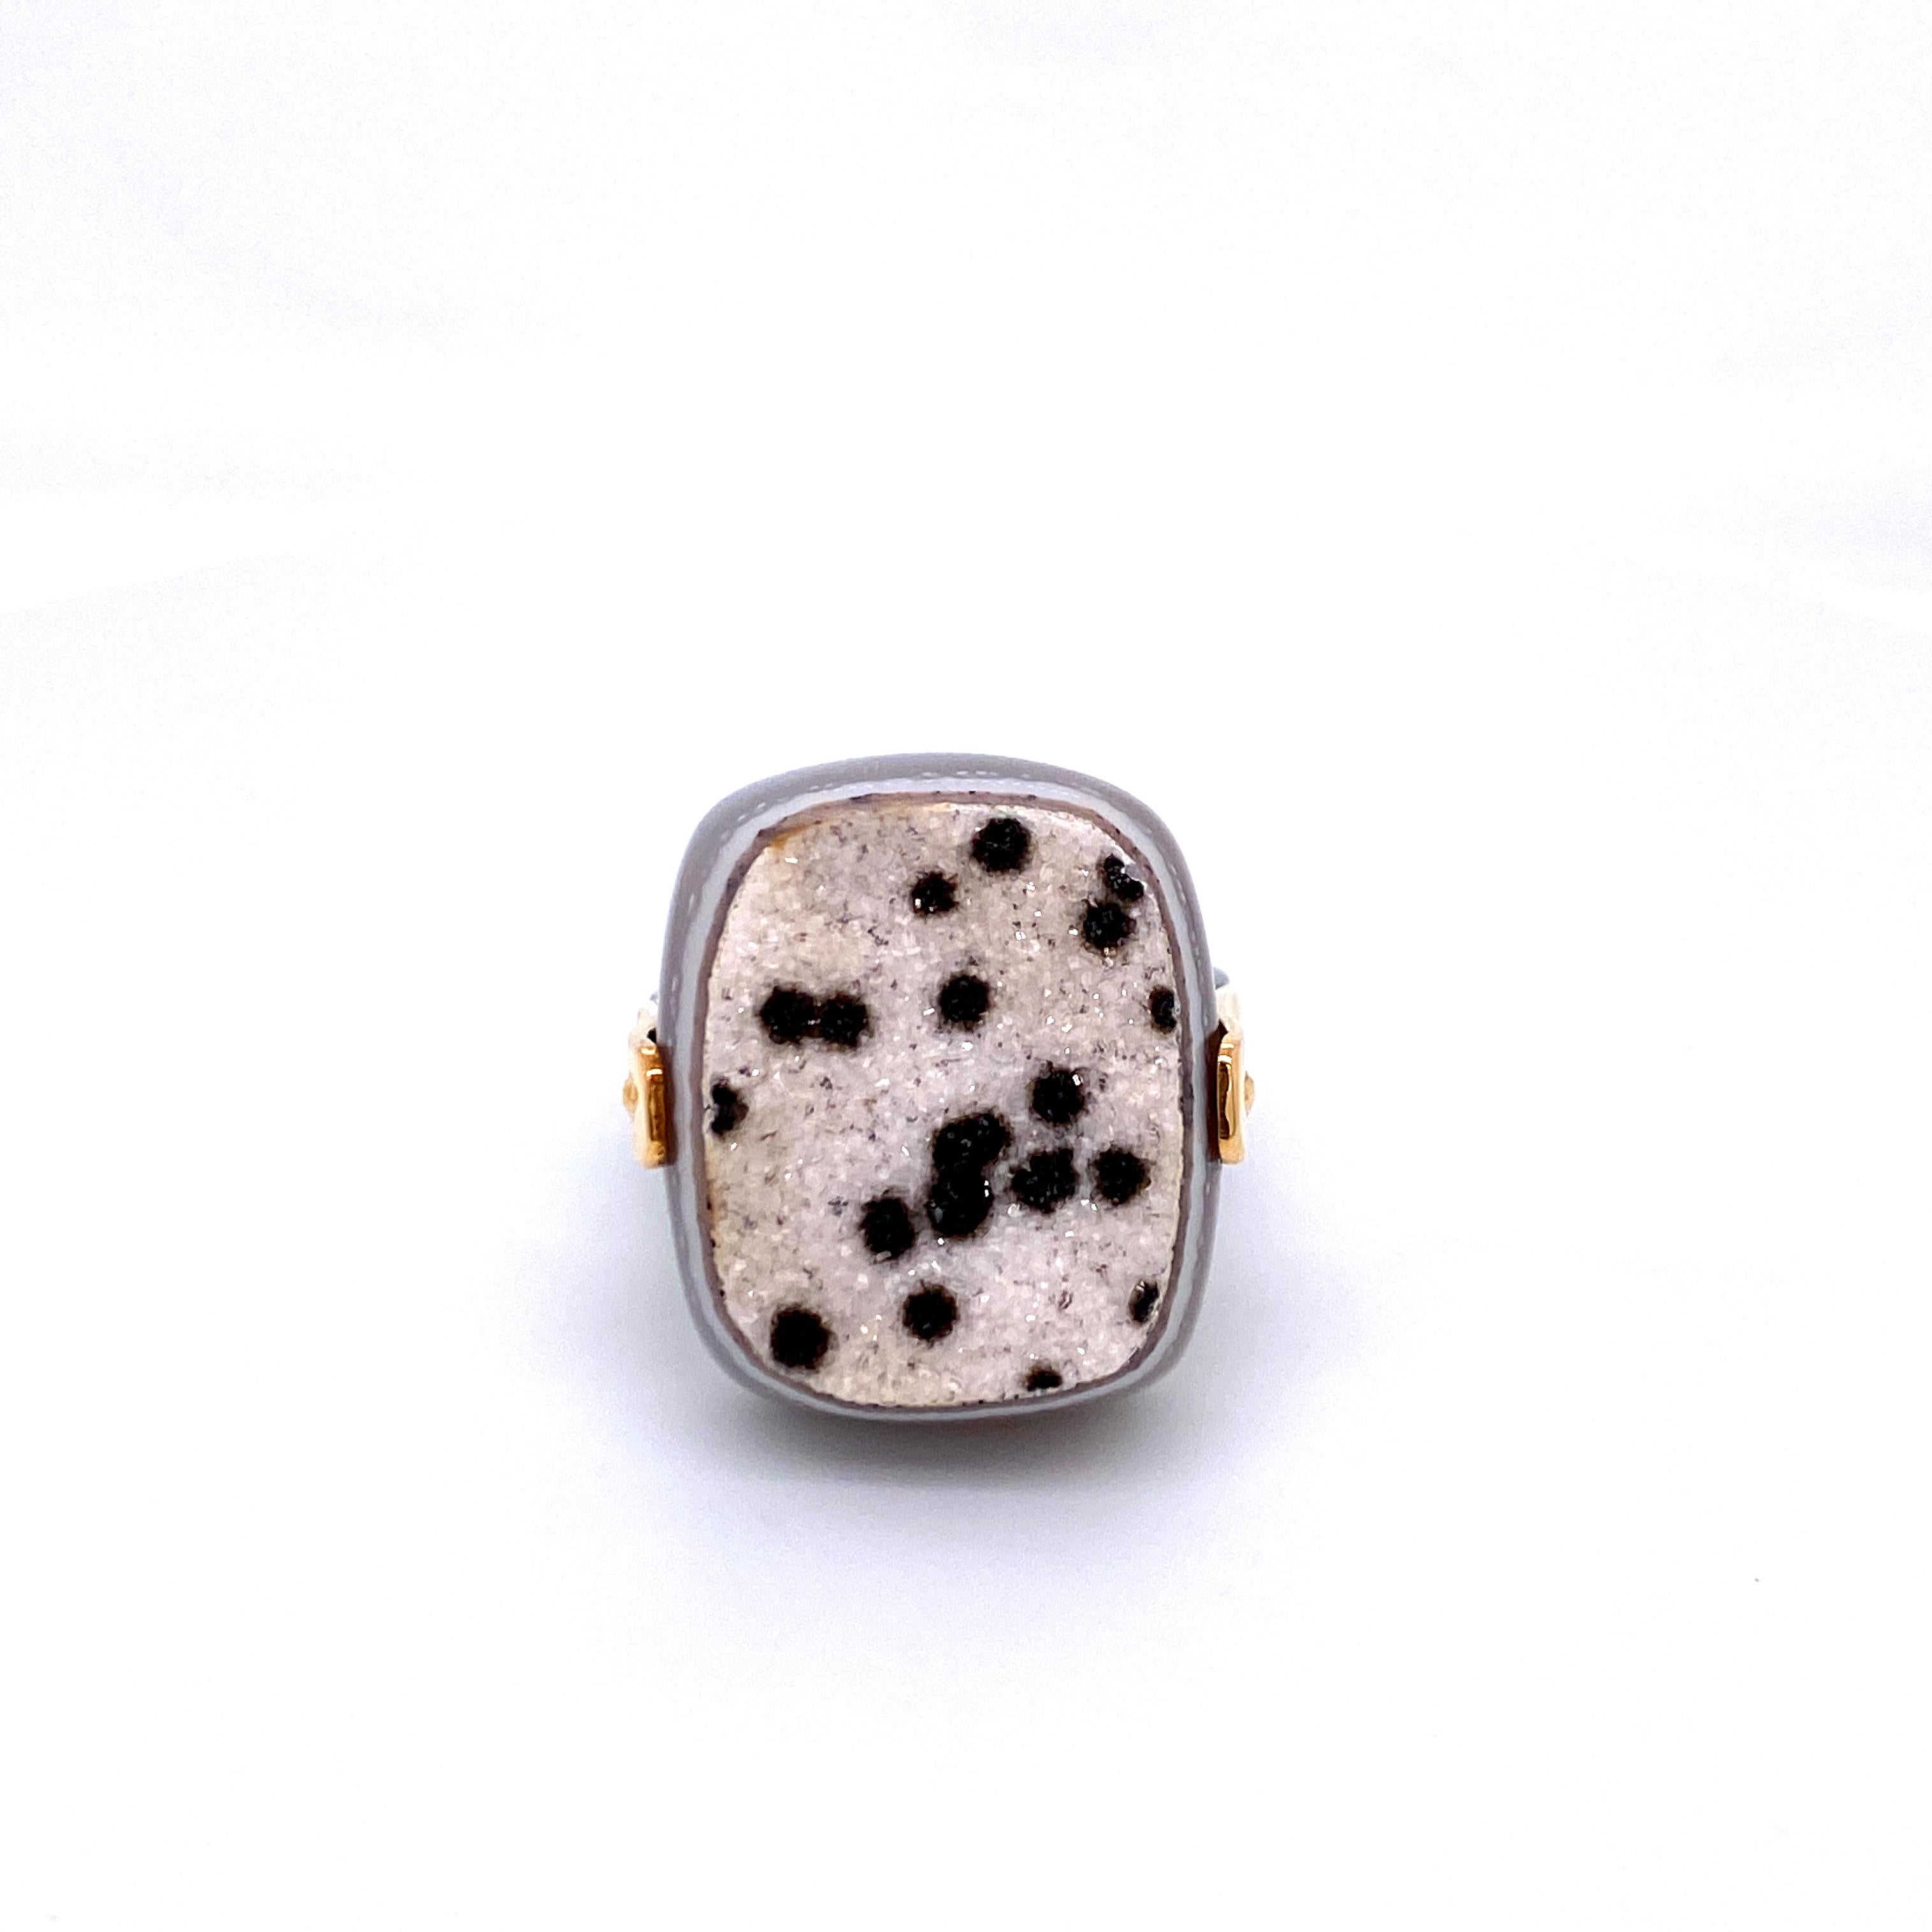 An oxidized sterling silver and 18k yellow gold ring featuring one cushion cut white druzy with black spots. Ring size 7.5. This ring was custom designed and made by llyn strong.